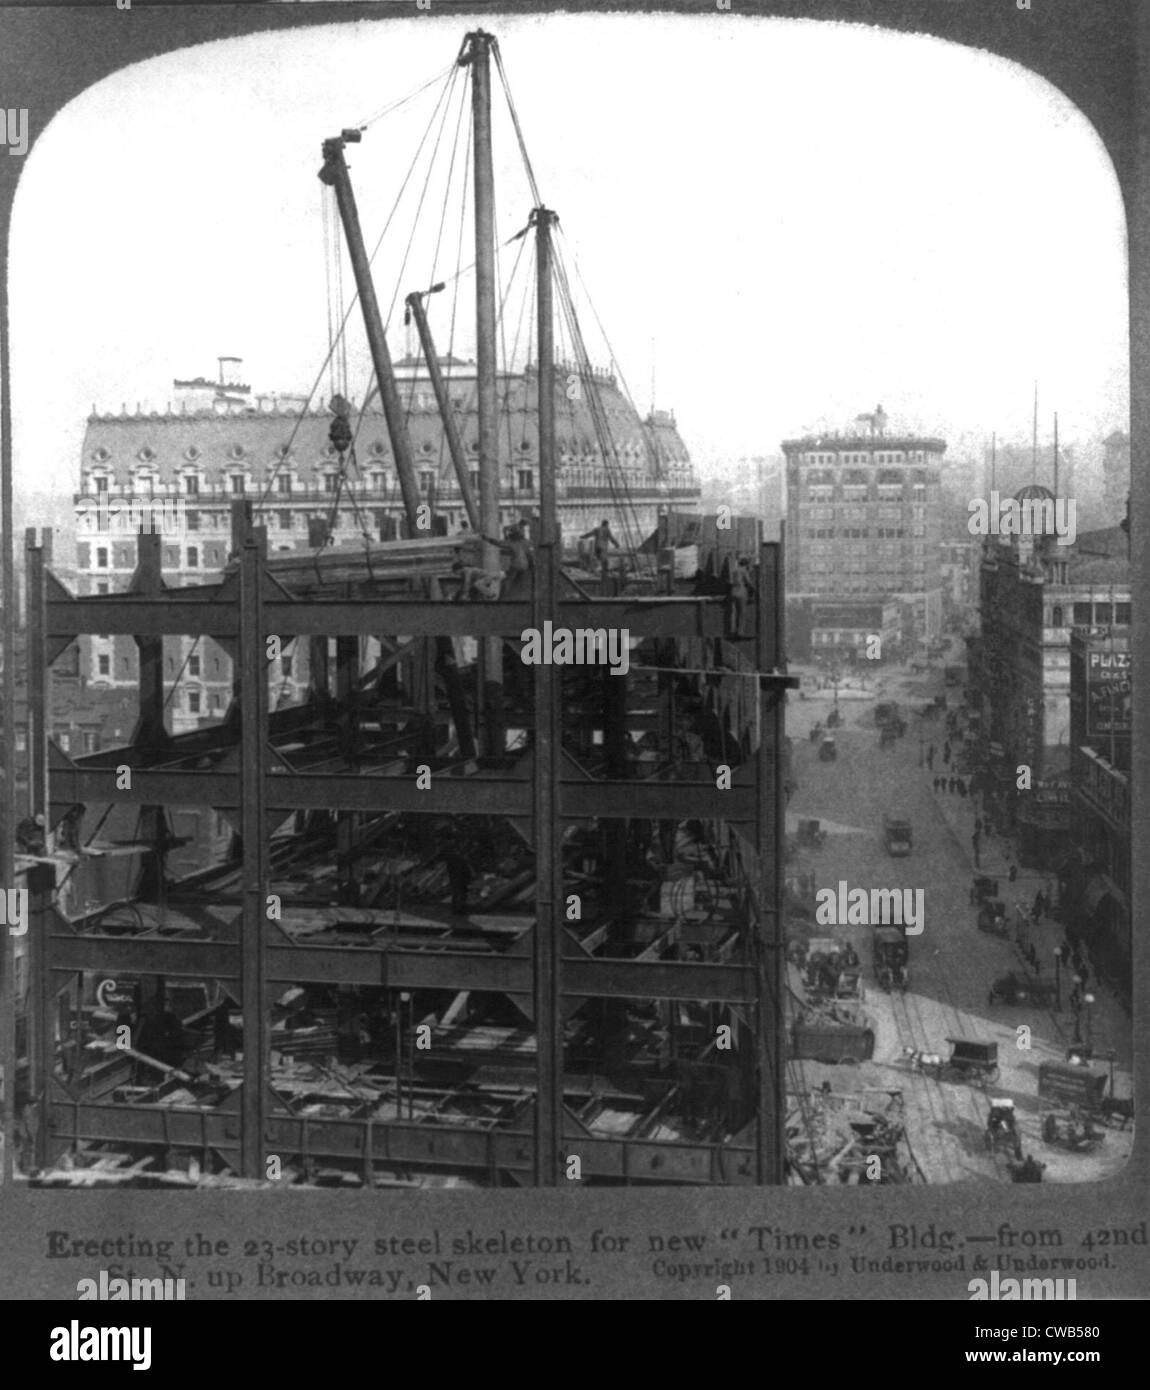 New York City, erecting the 23 story steel skeleton for the Times Building from 42nd Street North up Broadway, New York, Stock Photo